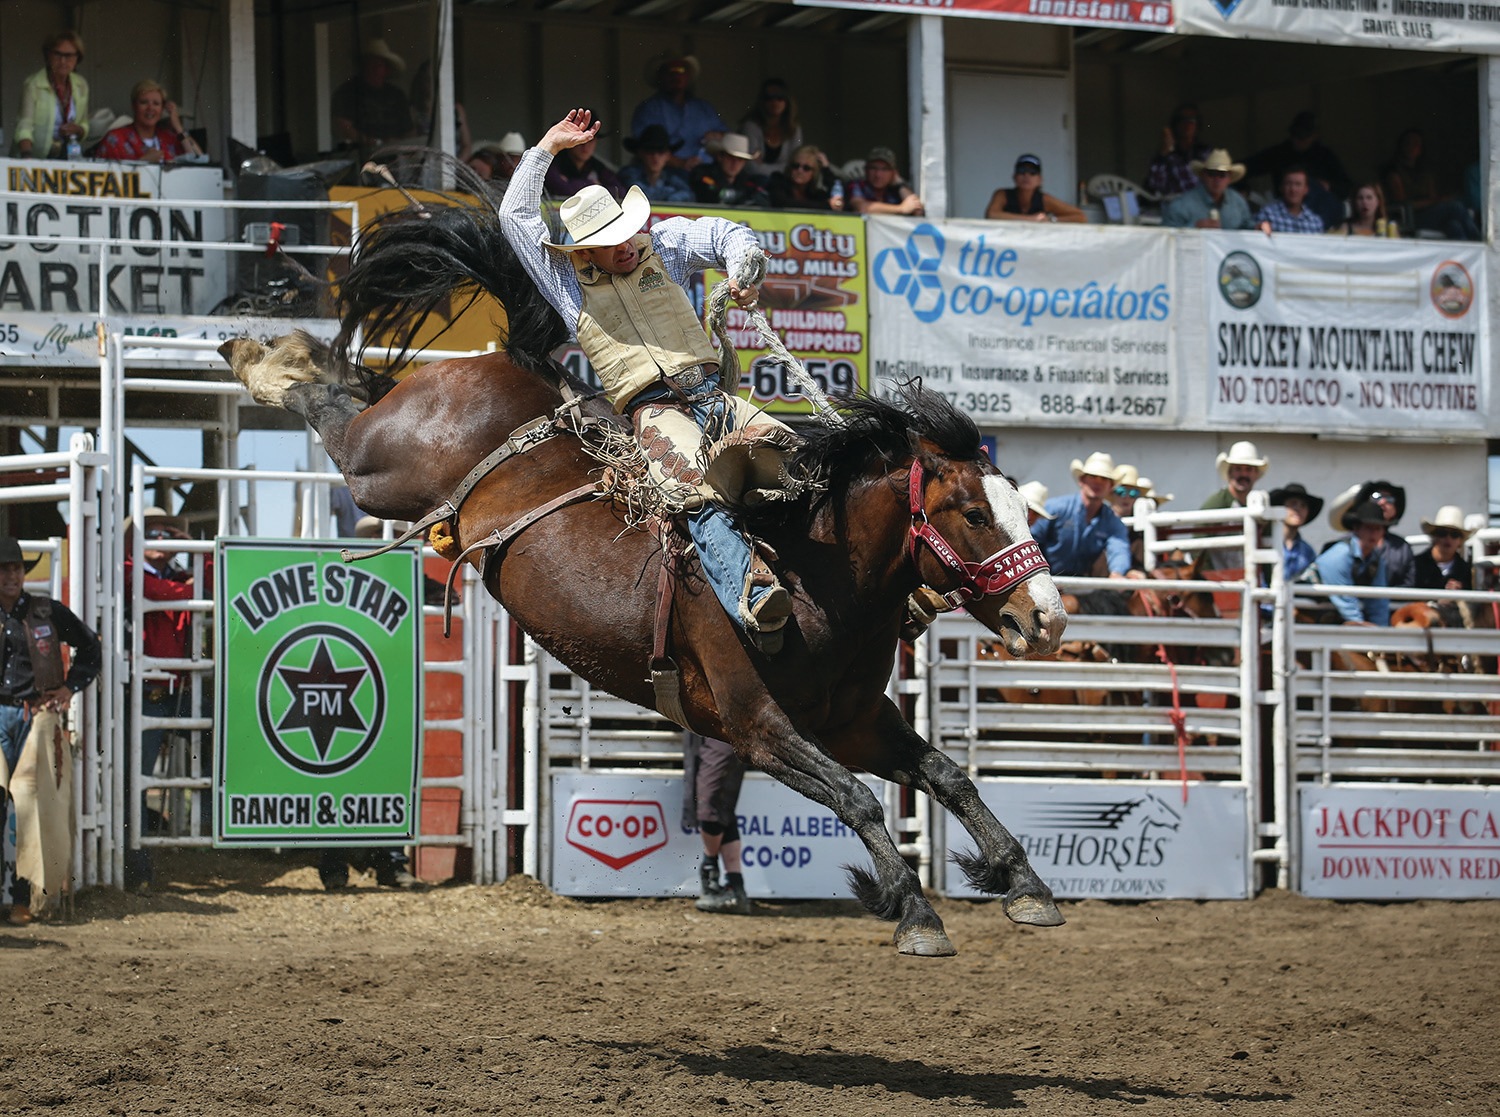 CHAMPION - Dusty Hausauer rode the Calgary Stampede’s Stampede Warrior to an 86 point ride to claim the championship in Saddle Bronc during the Innisfail Pro Rodeo at the Daines Rodeo Grounds last weekend.